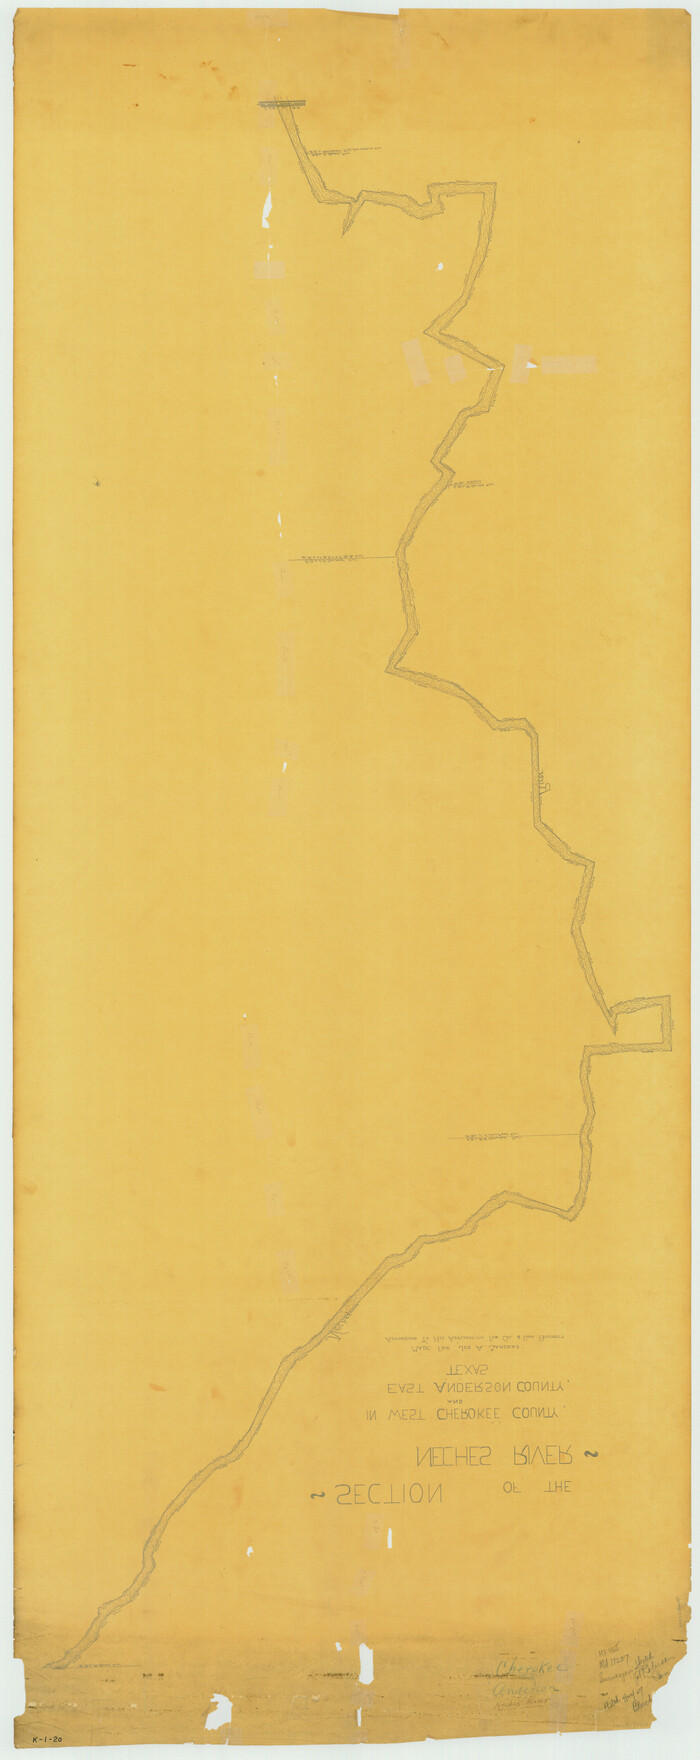 65687, [Sketch for Mineral Application 17237 / Mineral File 11855 - Neches River, Joe A. Sanders], General Map Collection